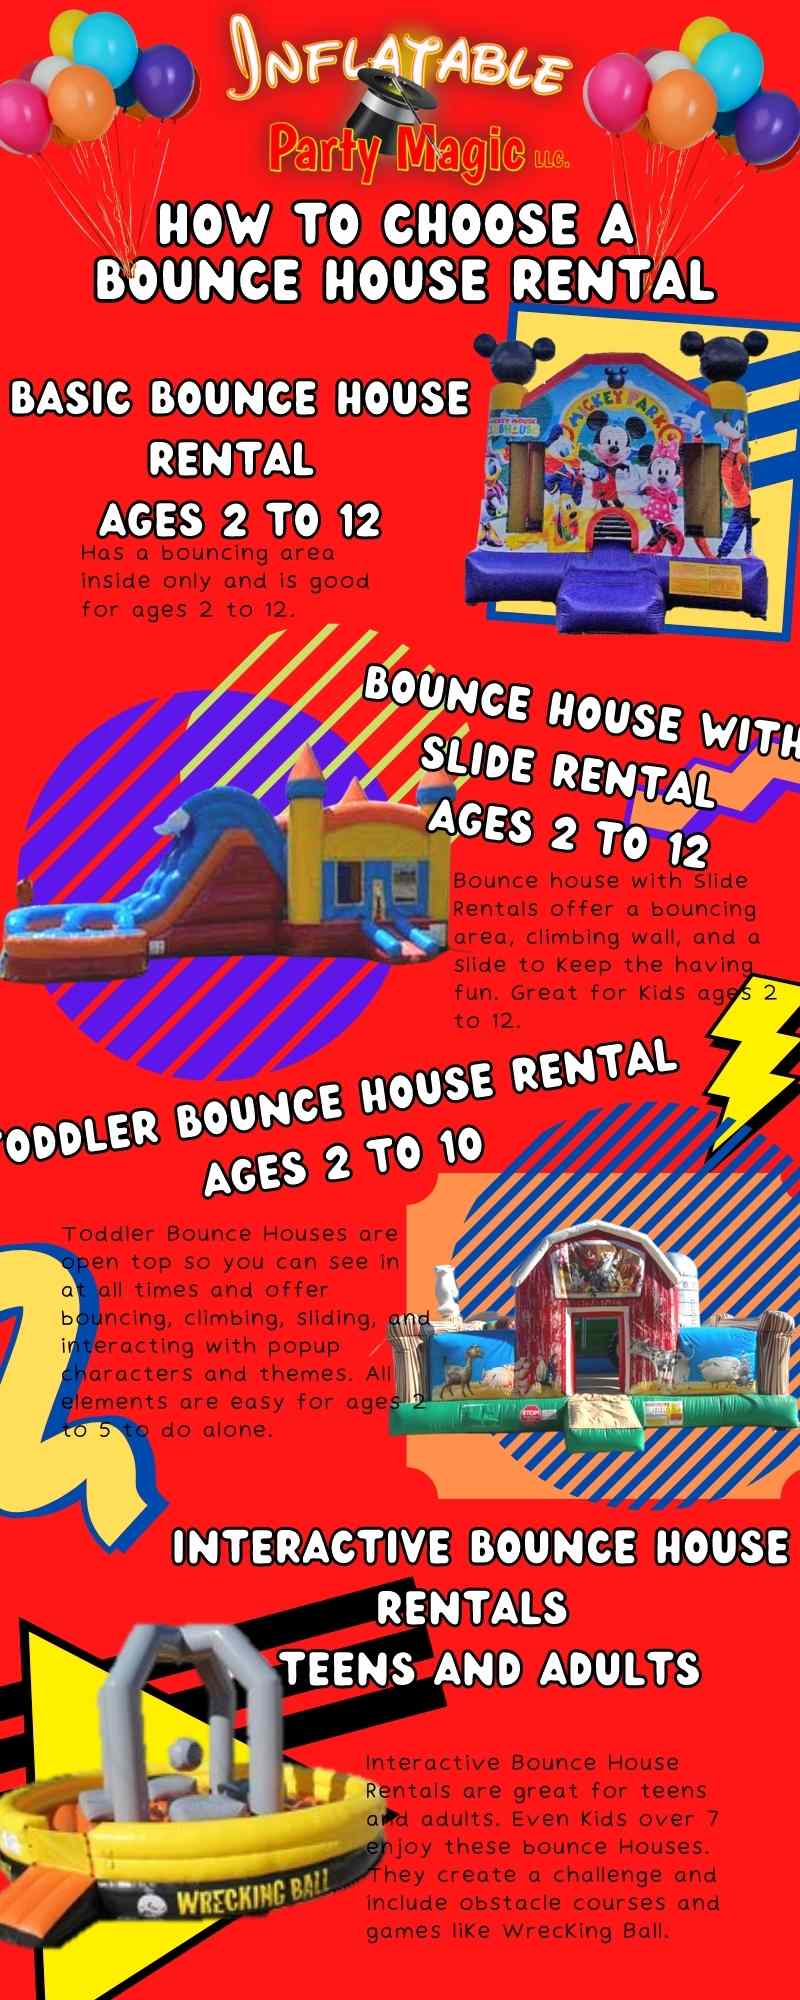 How to Choose a Bounce House near me by age group